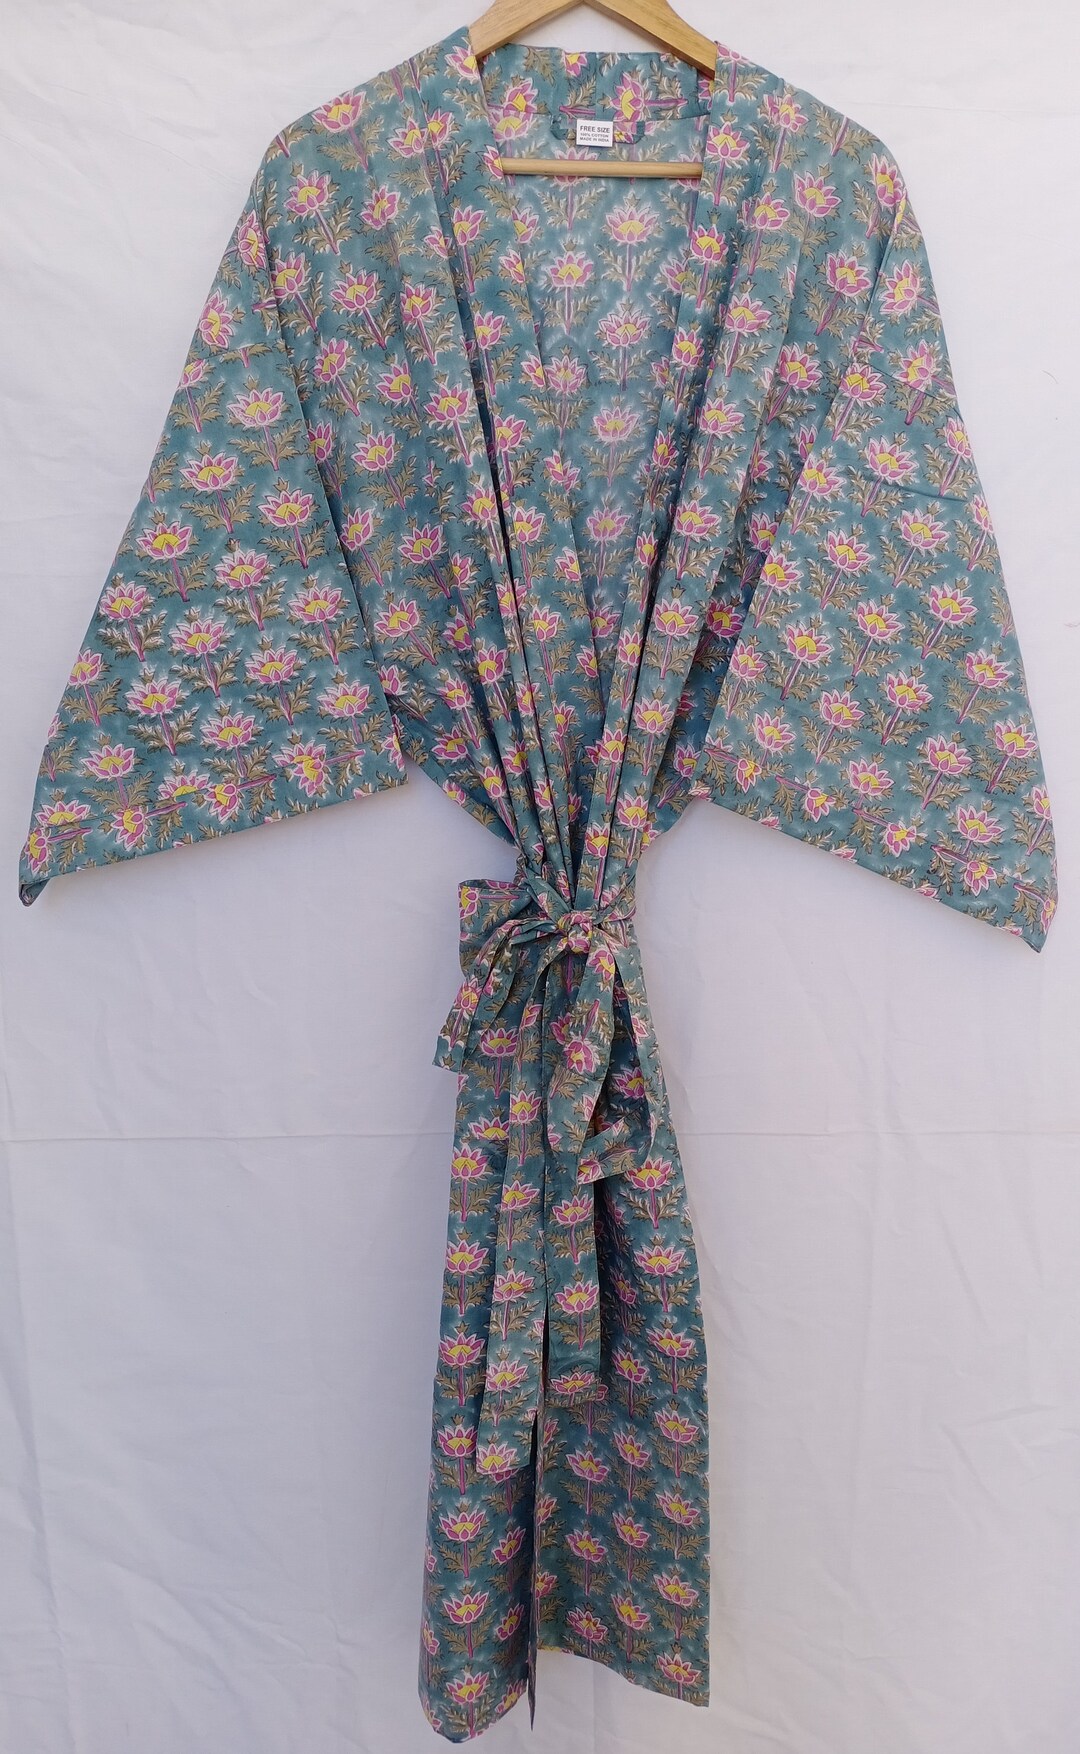 Hand Block Printed Cotton Bathrobes Cotton Dressing Gown - Etsy